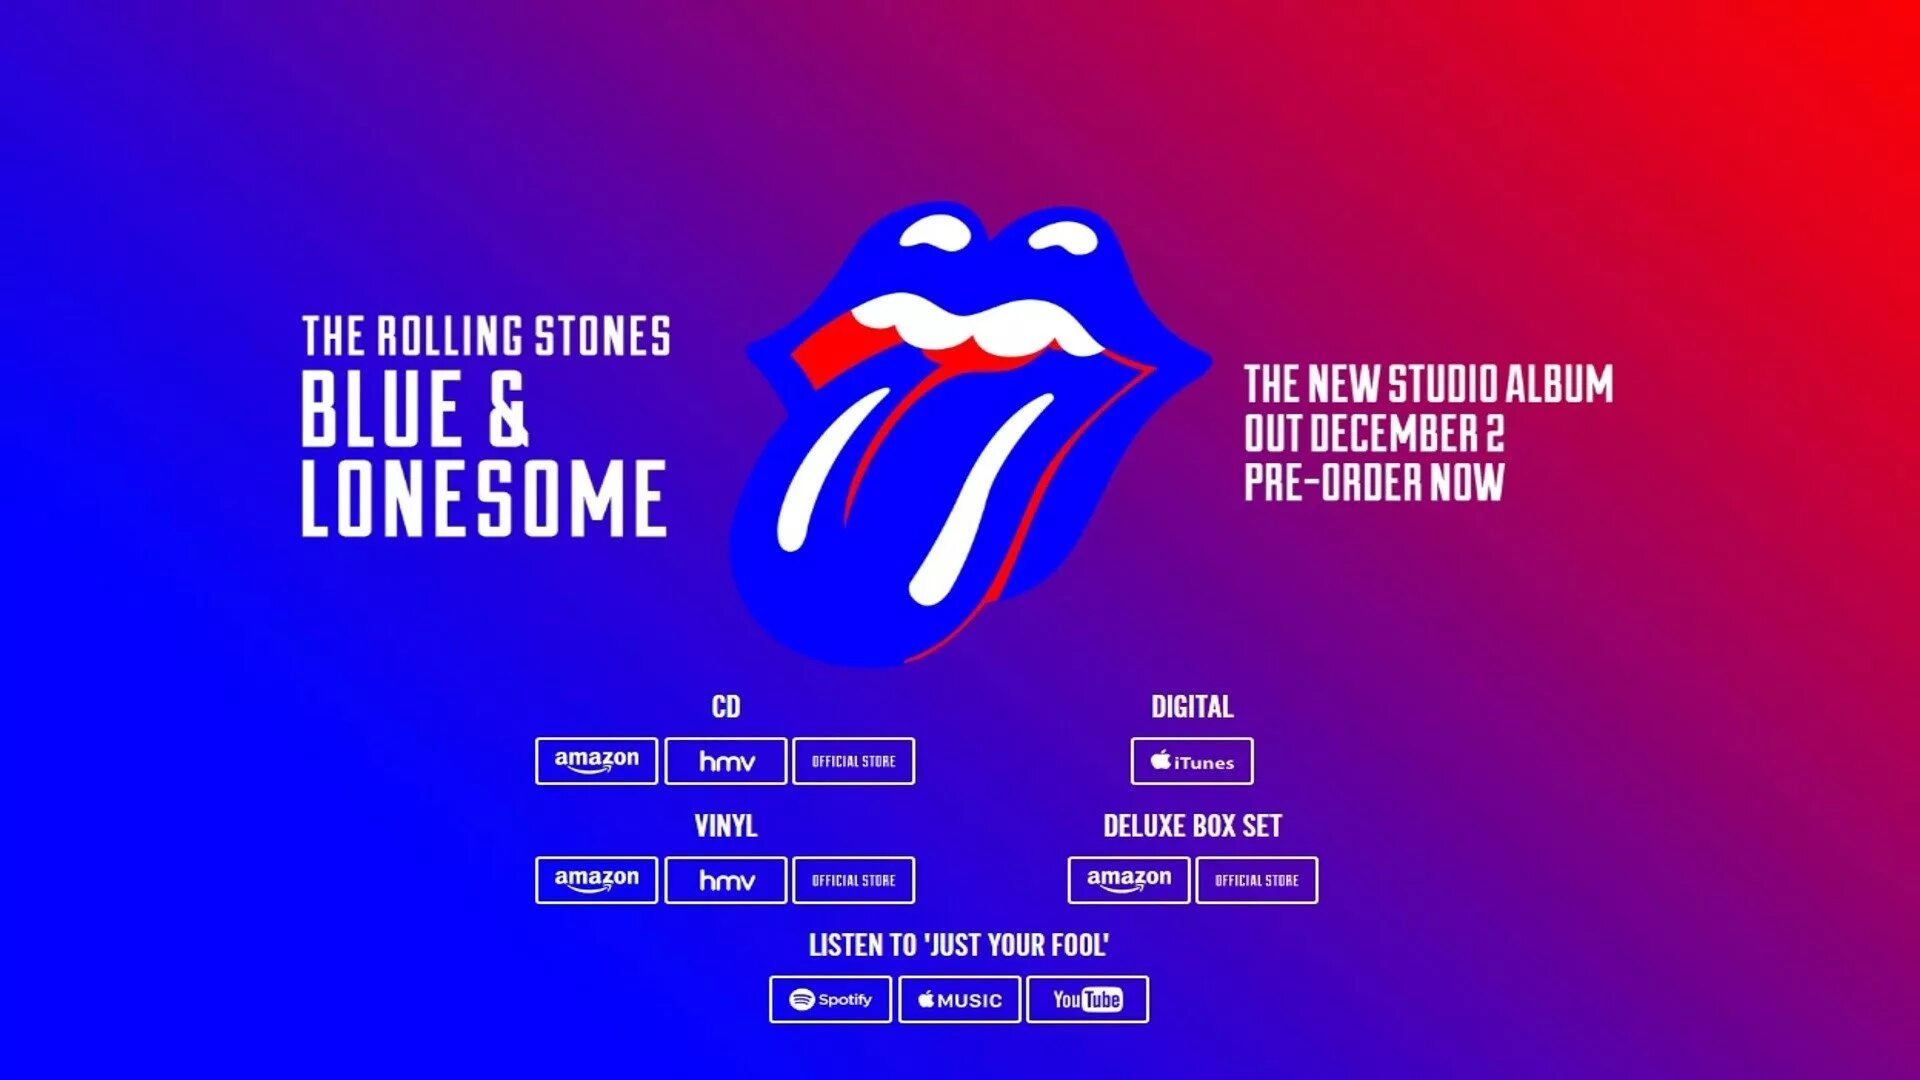 Mess it up the rolling. Rolling Stones Blue and Lonesome. Обои Роллинг стоунз. Rolling Stones стенд. The Rolling Stones logo синее.